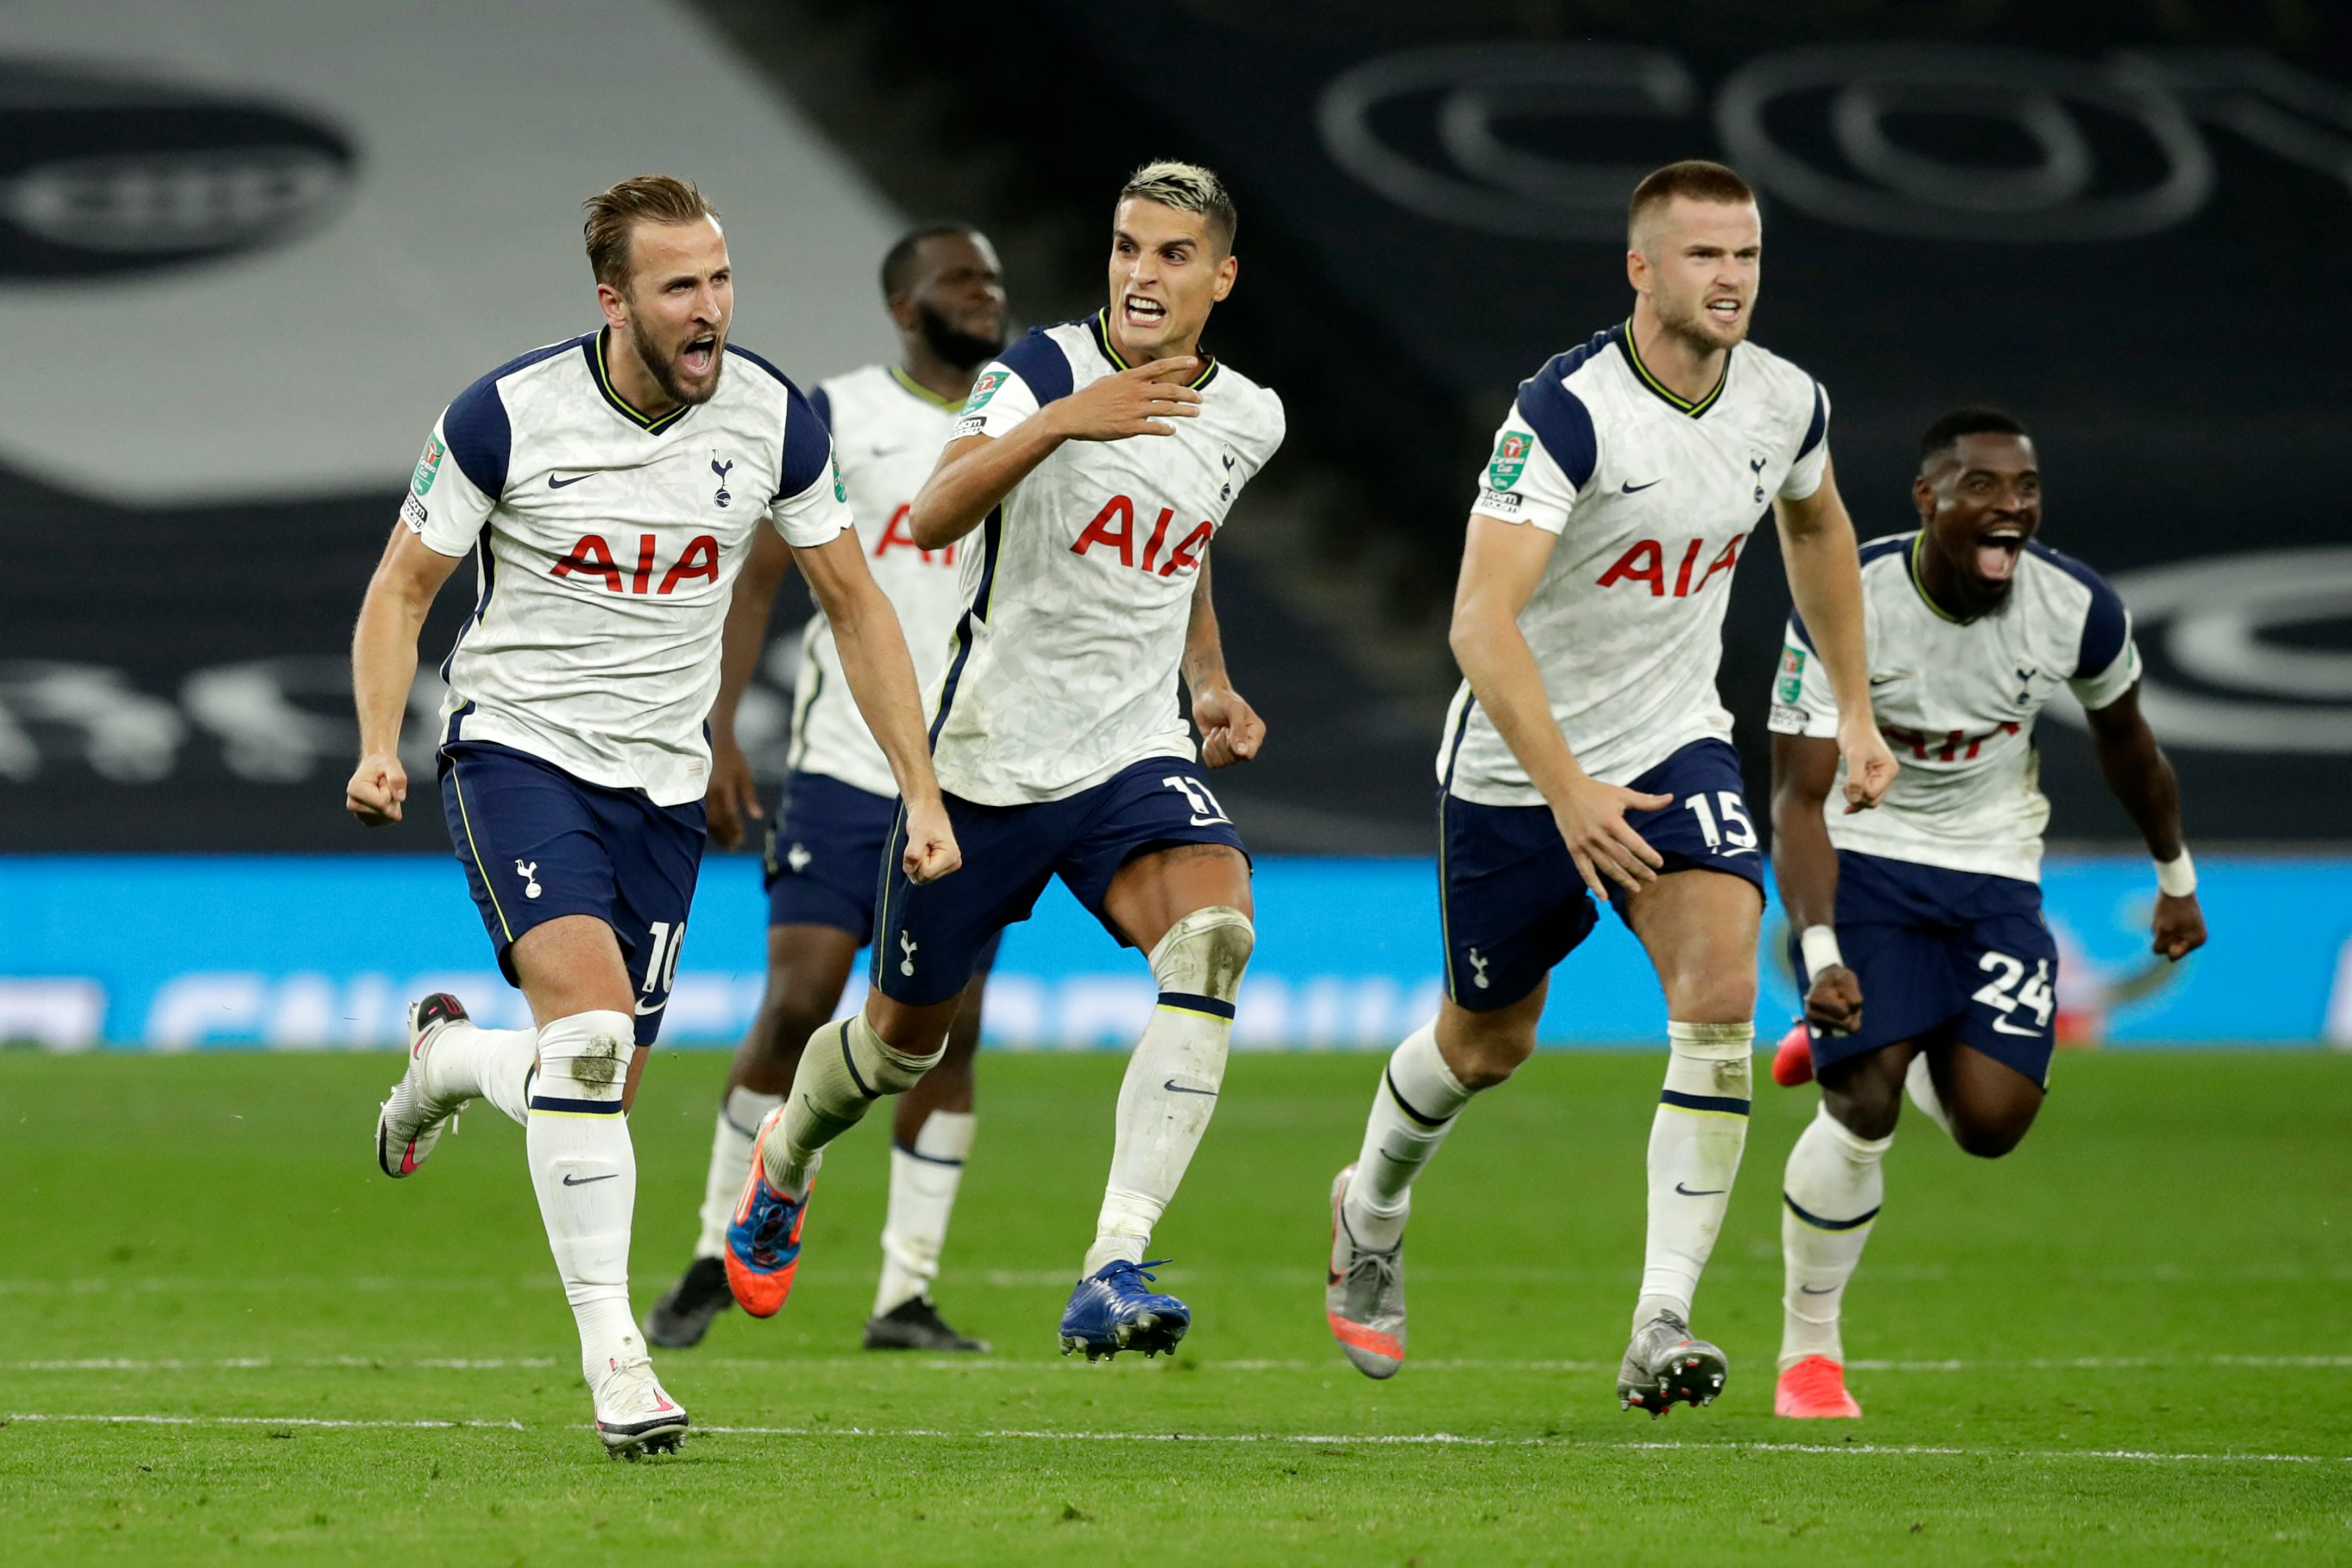 Tottenham Hotspur and Cups, Where Spurs Stand this Season